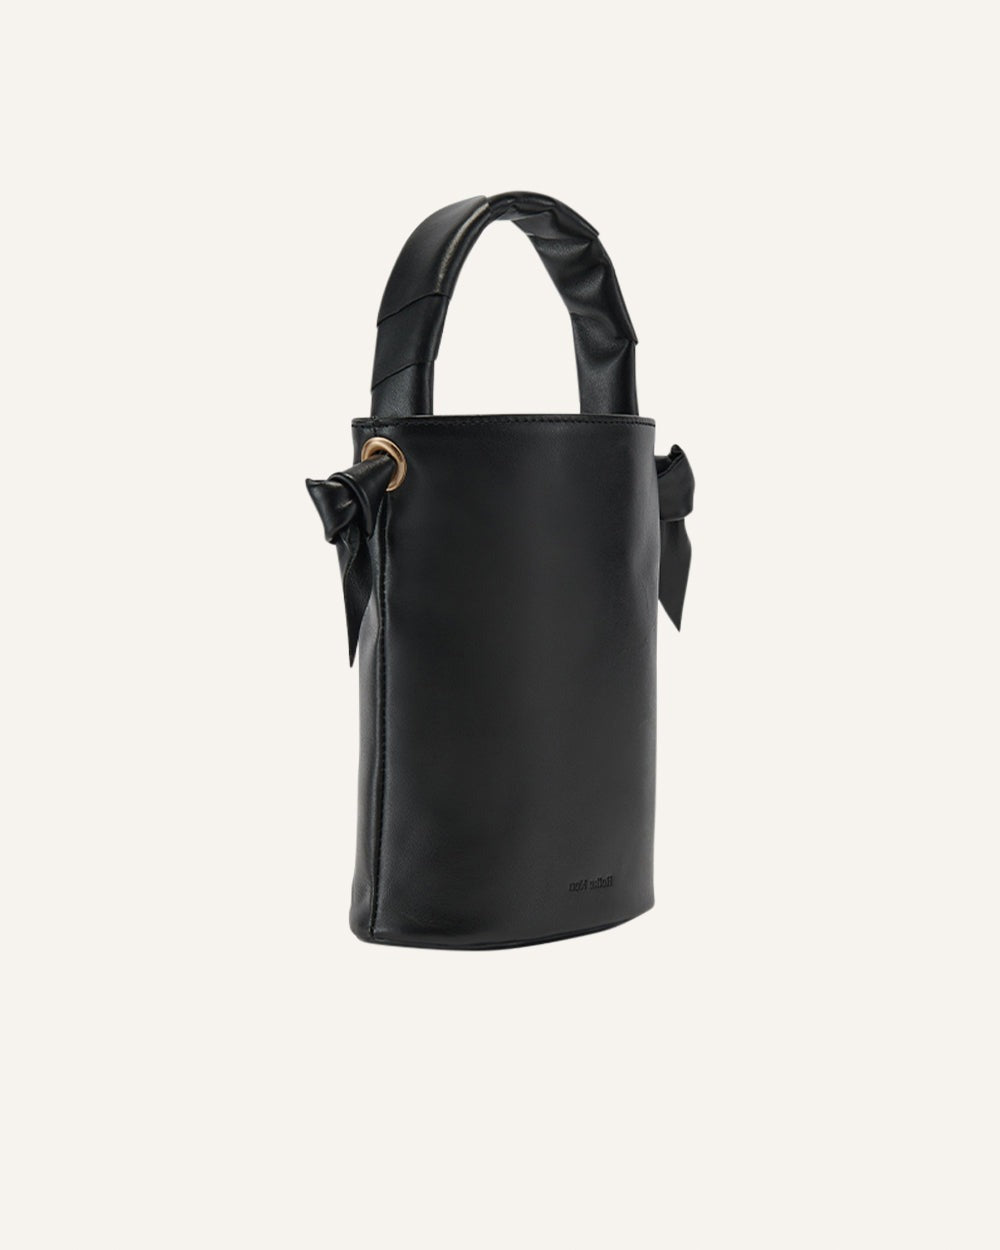 Cylindrical, Oval and Bucket Bags With Infinite Appeal - The New York Times